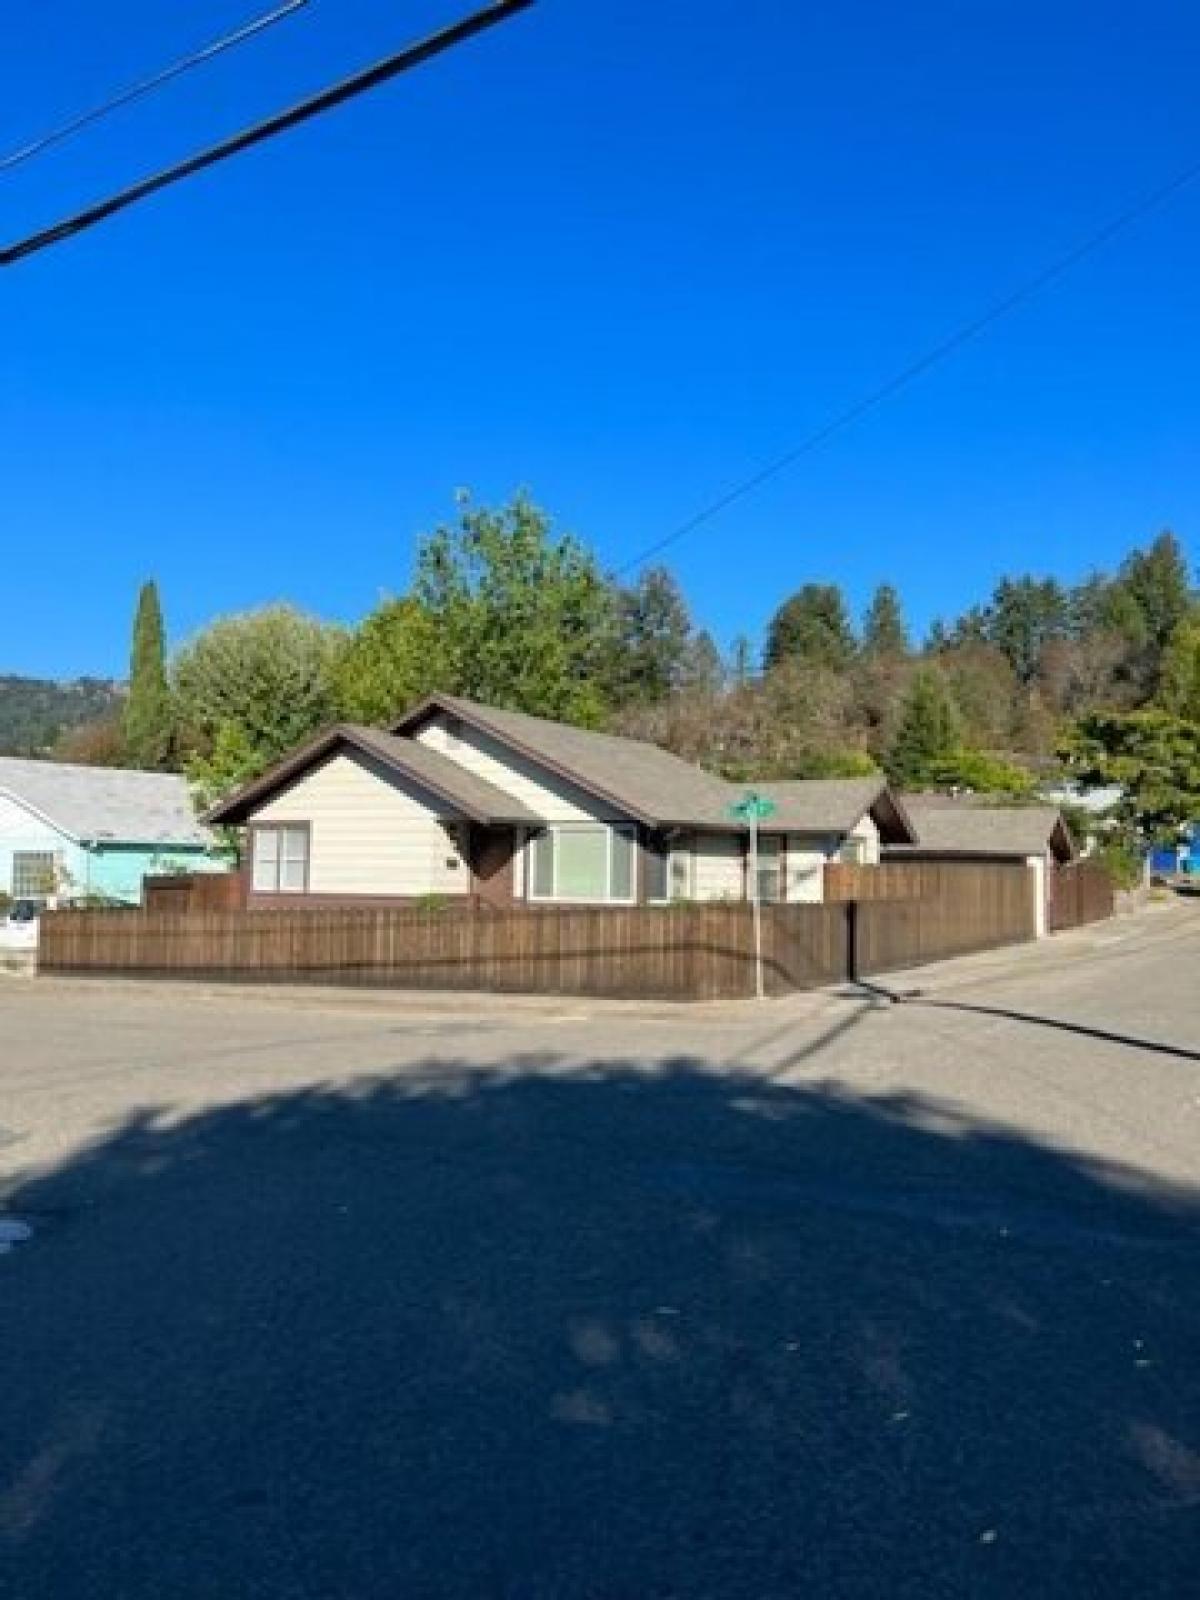 Picture of Home For Sale in Garberville, California, United States